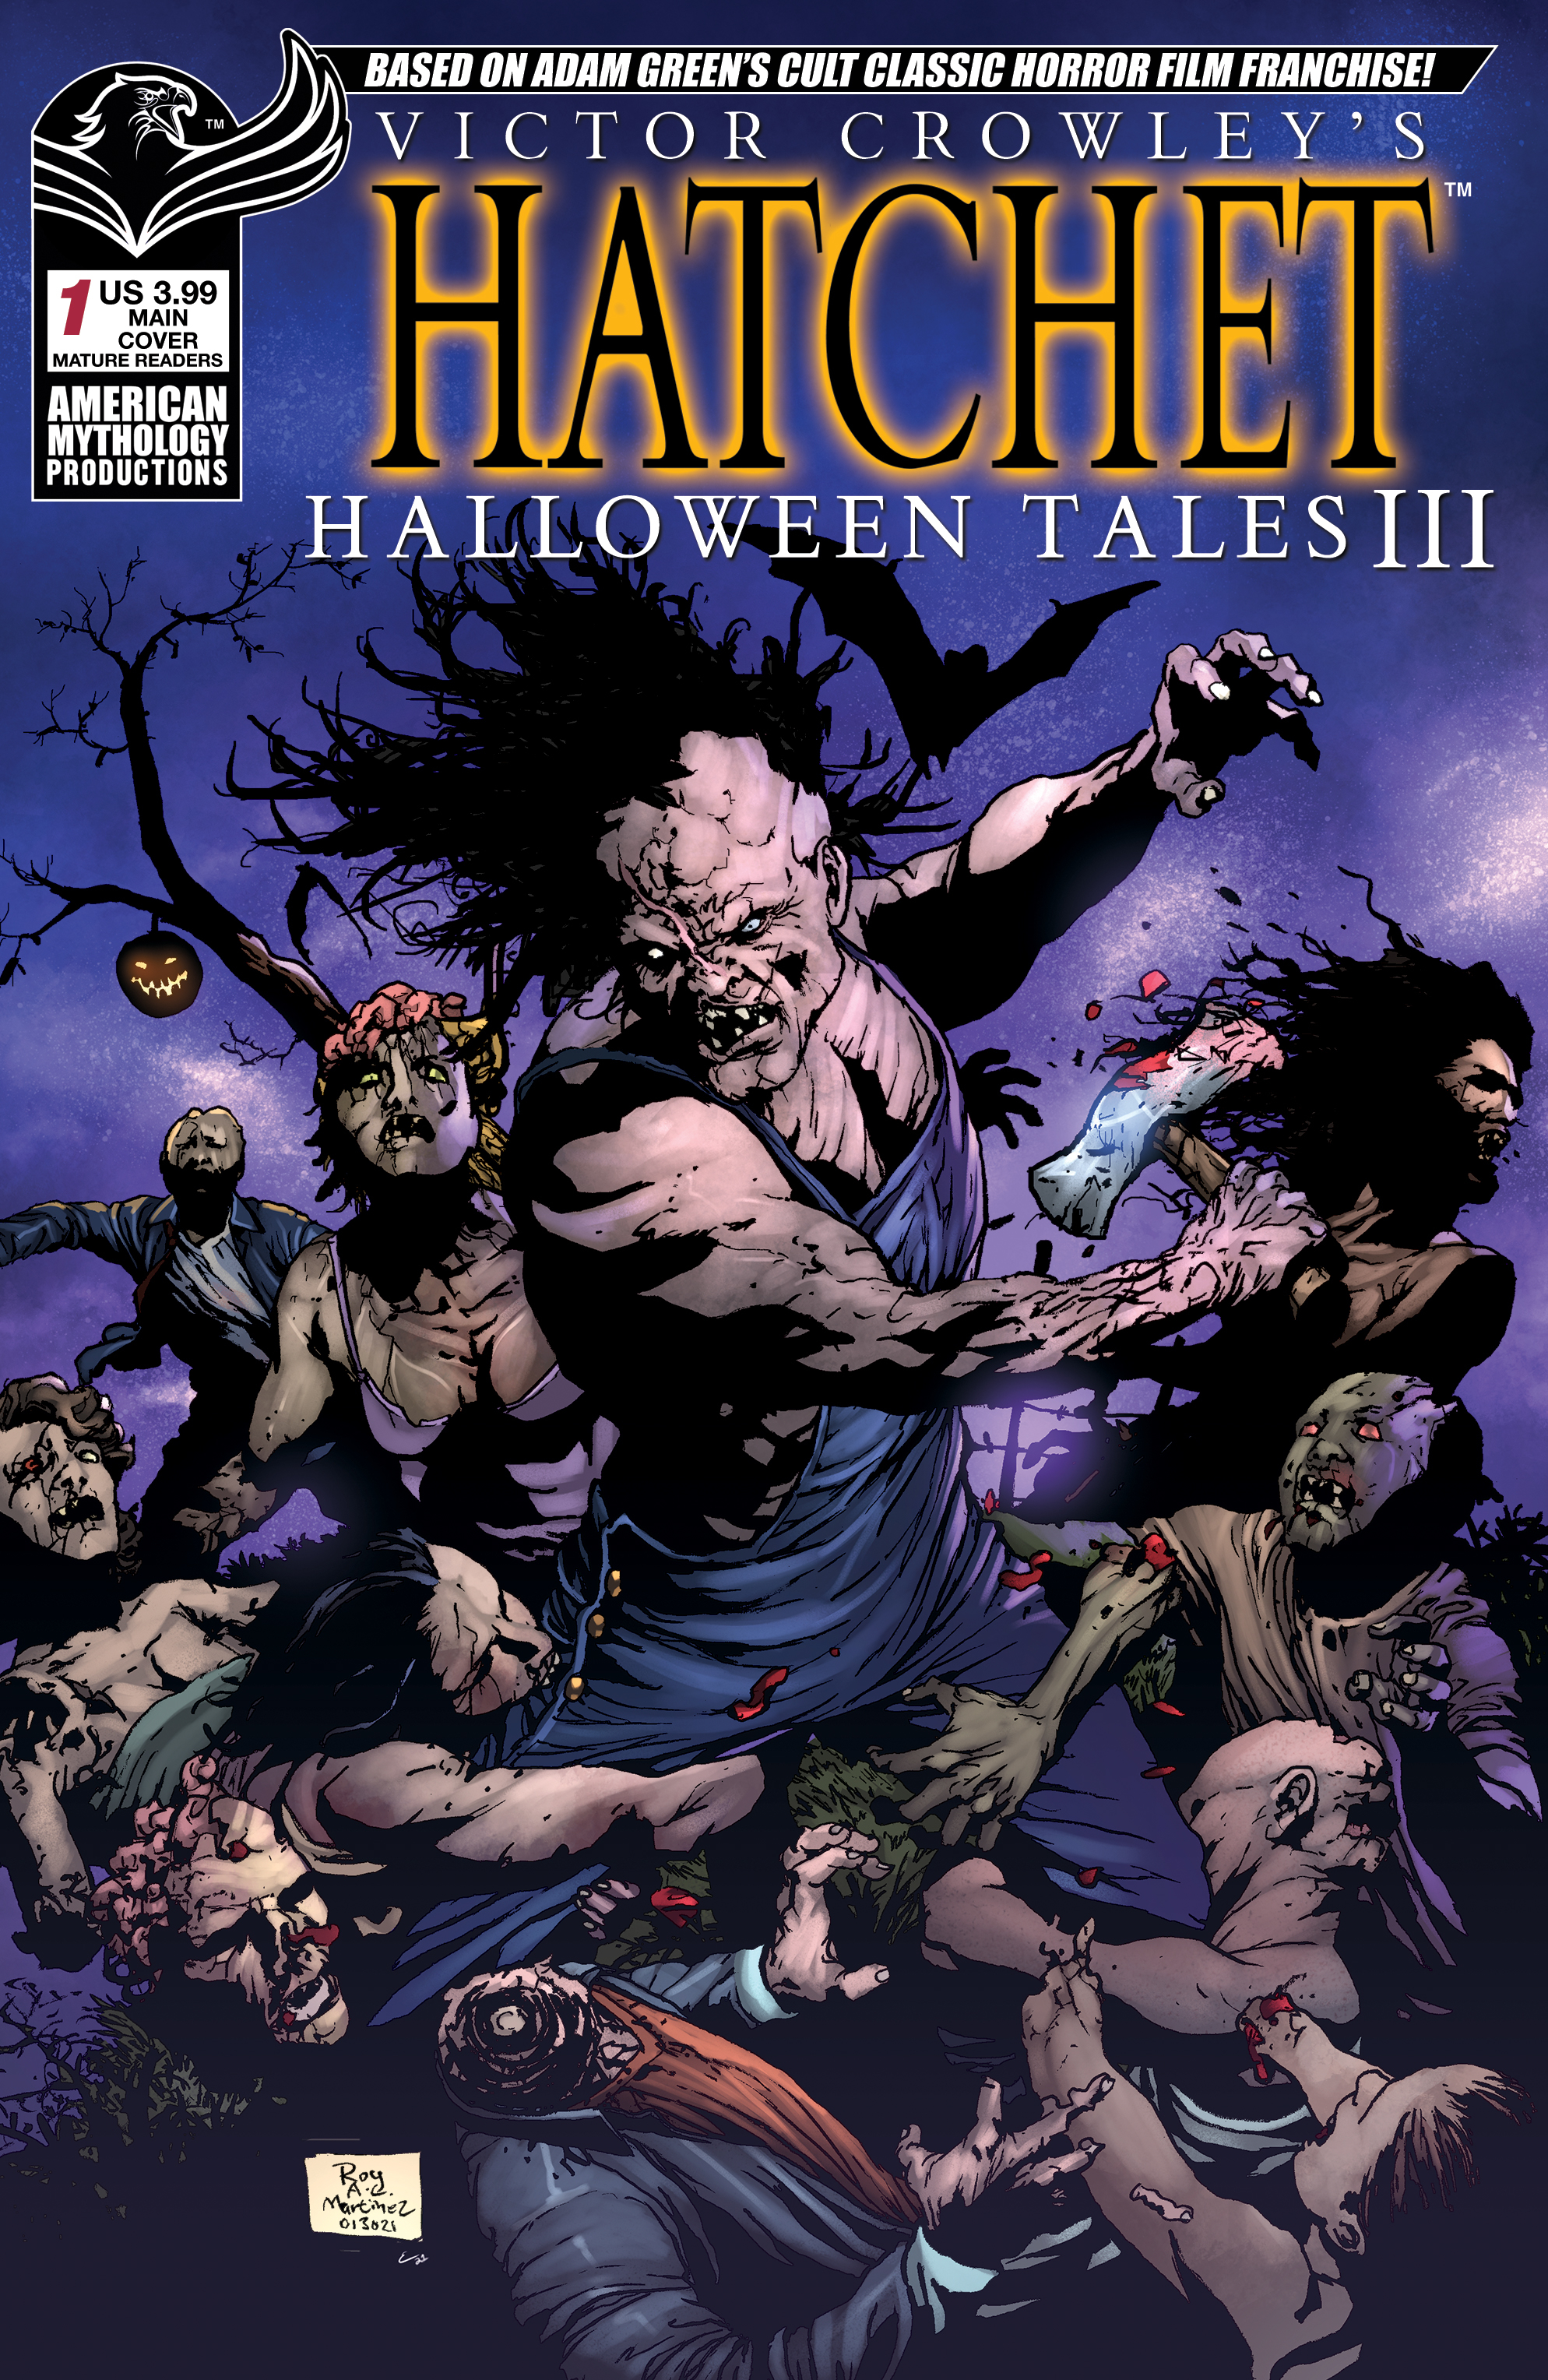 Victor Crowley Hatchet Halloween III #1 Cover A Dead Rise (Mature)